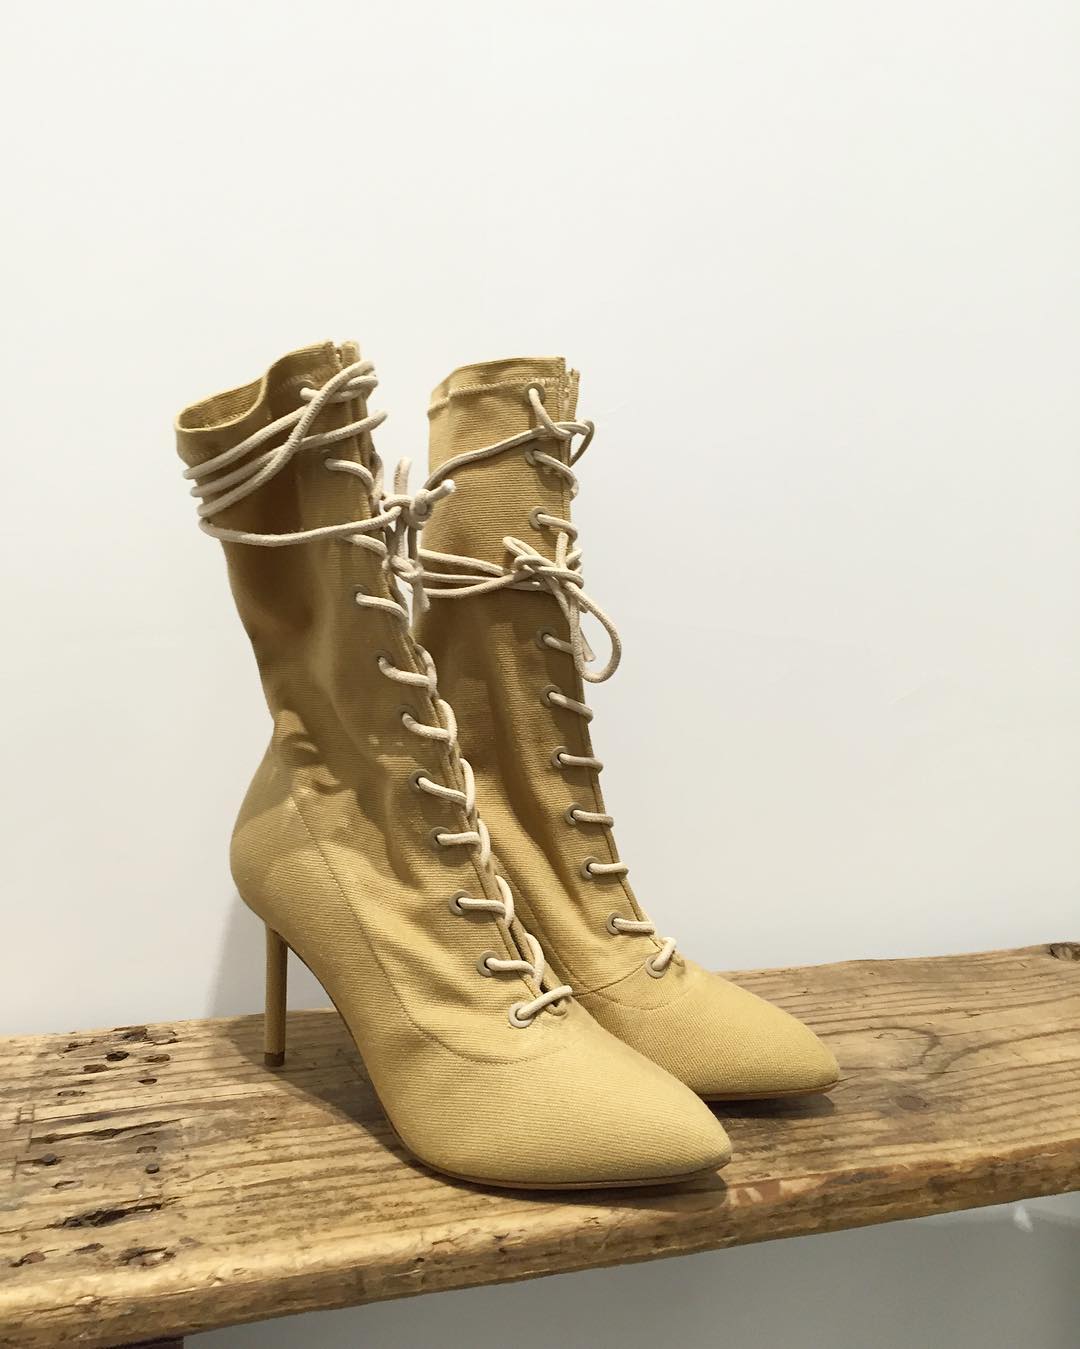 yeezy season 4 lace up boots